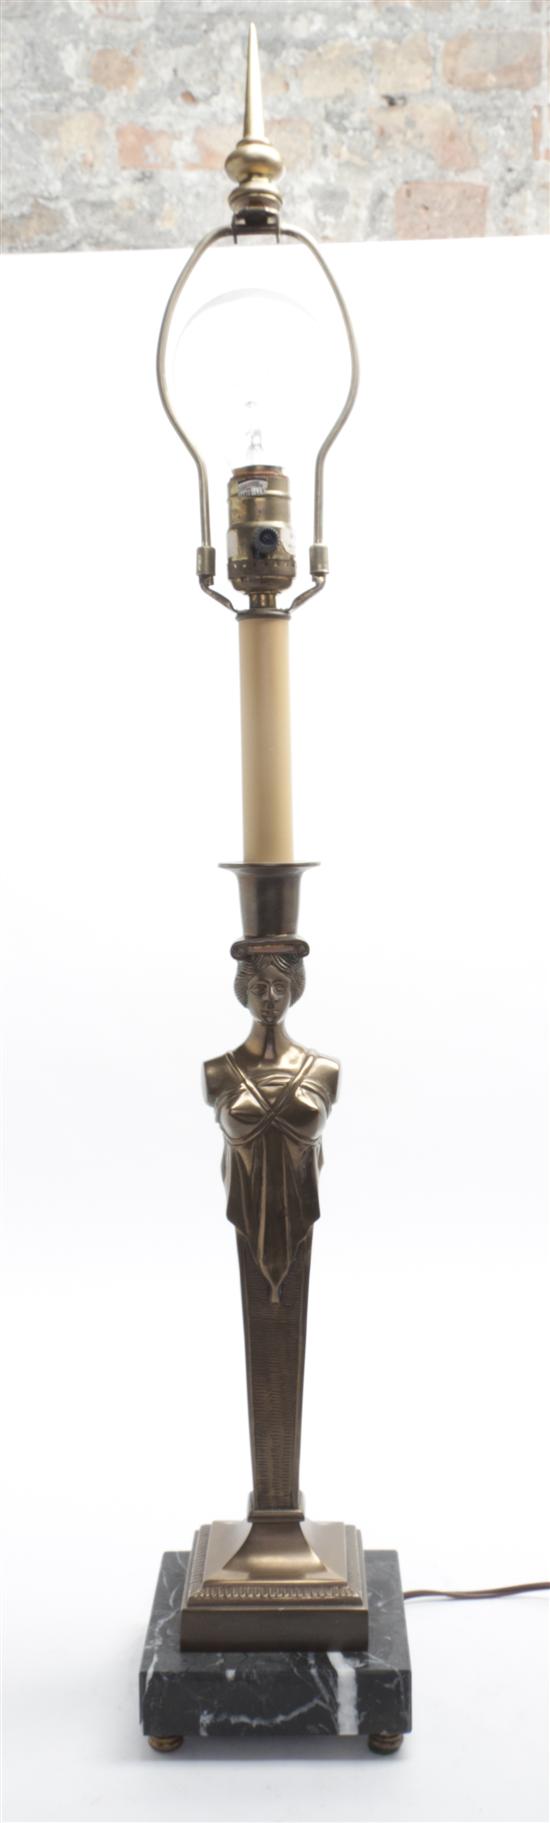 A Neoclassical Brass Table Lamp 1522b2